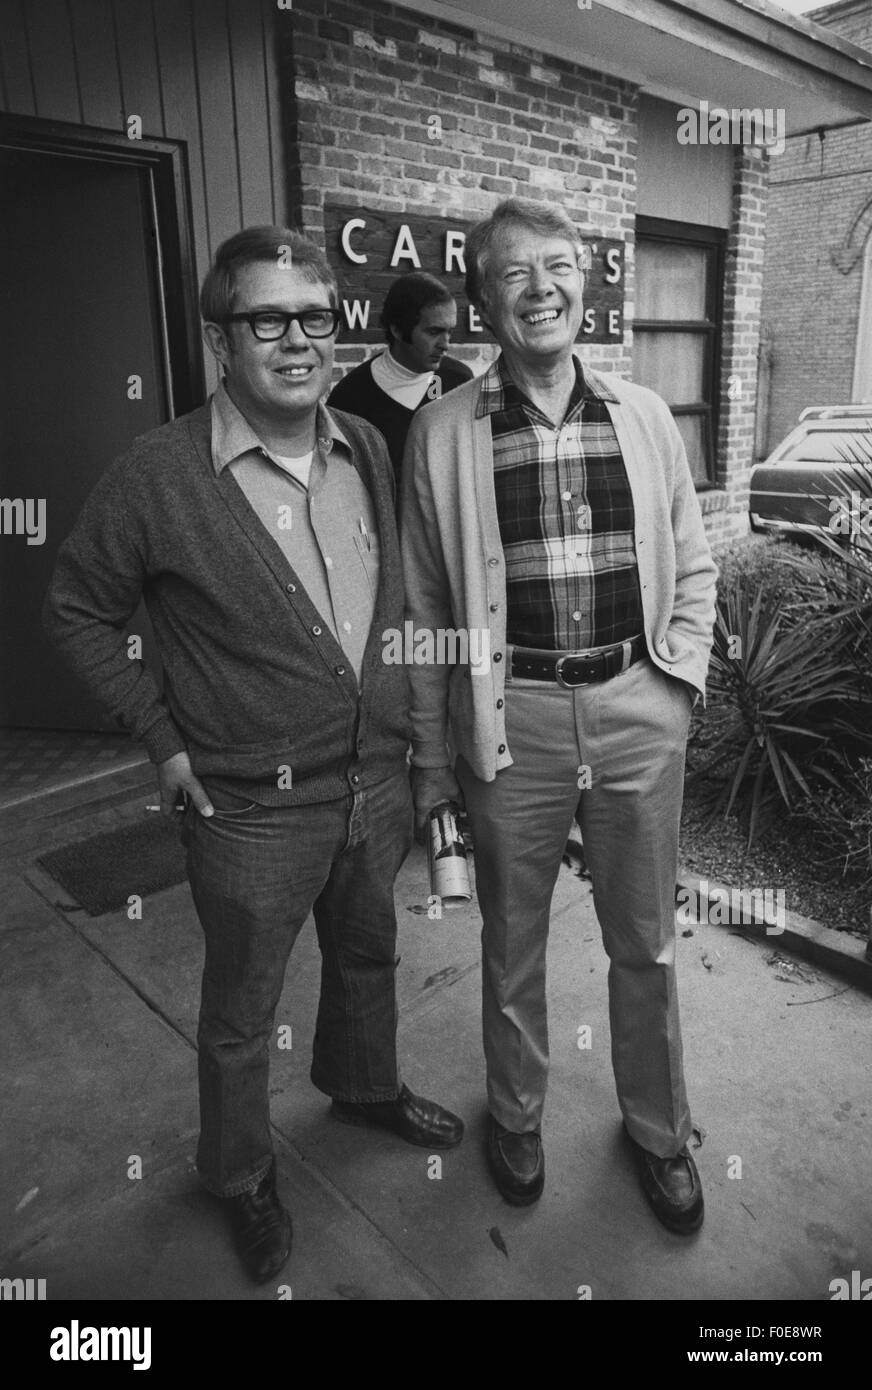 Jimmy and Brother Billy Carter at Carters Warehouse in Plains, Georgia. The brothers also own agricultural land surrounding the rural South Georgia town. 3rd Feb, 2015. © Ken Hawkins/ZUMA Wire/Alamy Live News Stock Photo